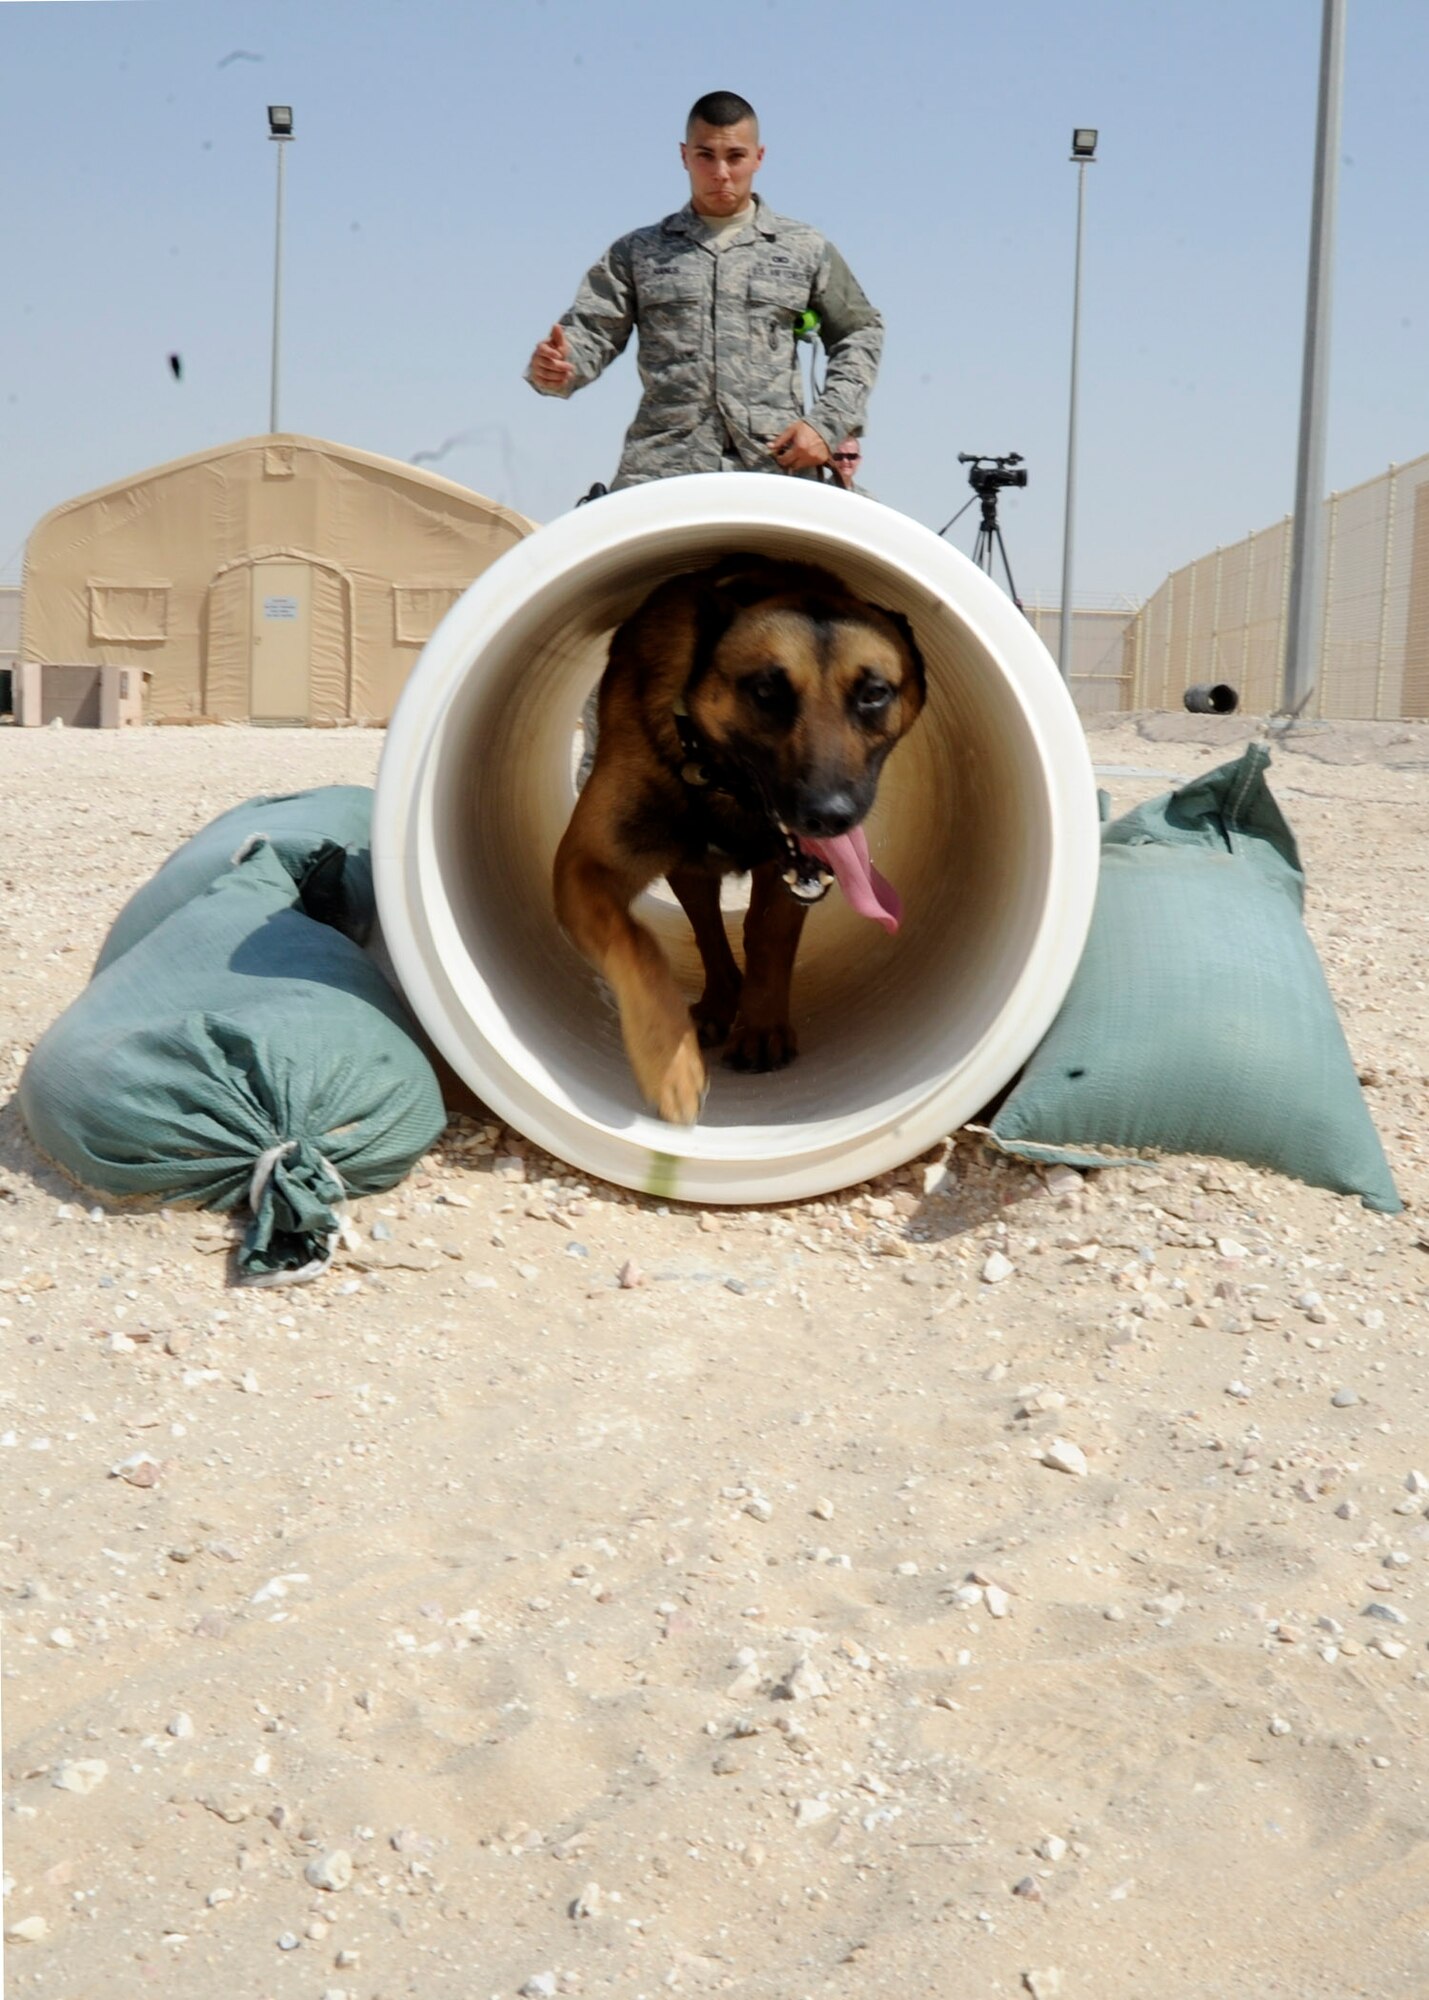 Military working dog, Beni, runs through a tunnel under the instruction of Senior Airman Andrew Hanus at the 379th Air Expeditionary Wing in Southwest Asia, June 26, 2013. Military working dogs serve as a psychological deterrent and are trained to attack on command. Hanus is a 379th Expeditionary Security Forces Squadron military working dog handler and Beni is a 379th ESFS MWD both deployed from Travis Air Force Base, Calif. (U.S. Air Force photo/Senior Airman Bahja J. Jones) 